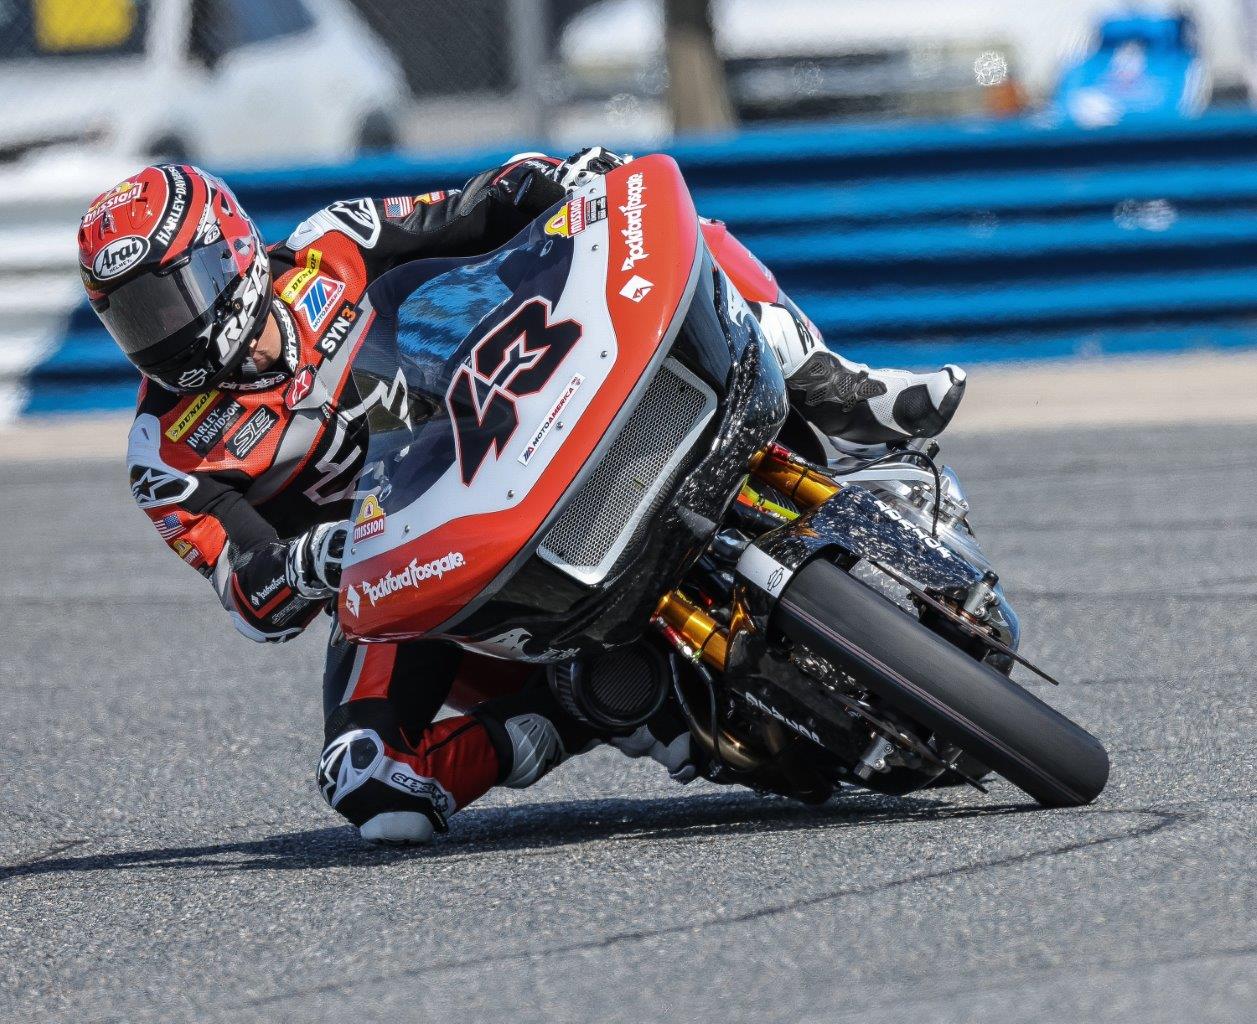 HarleyDavidson scores double victories at opening King of the Baggers